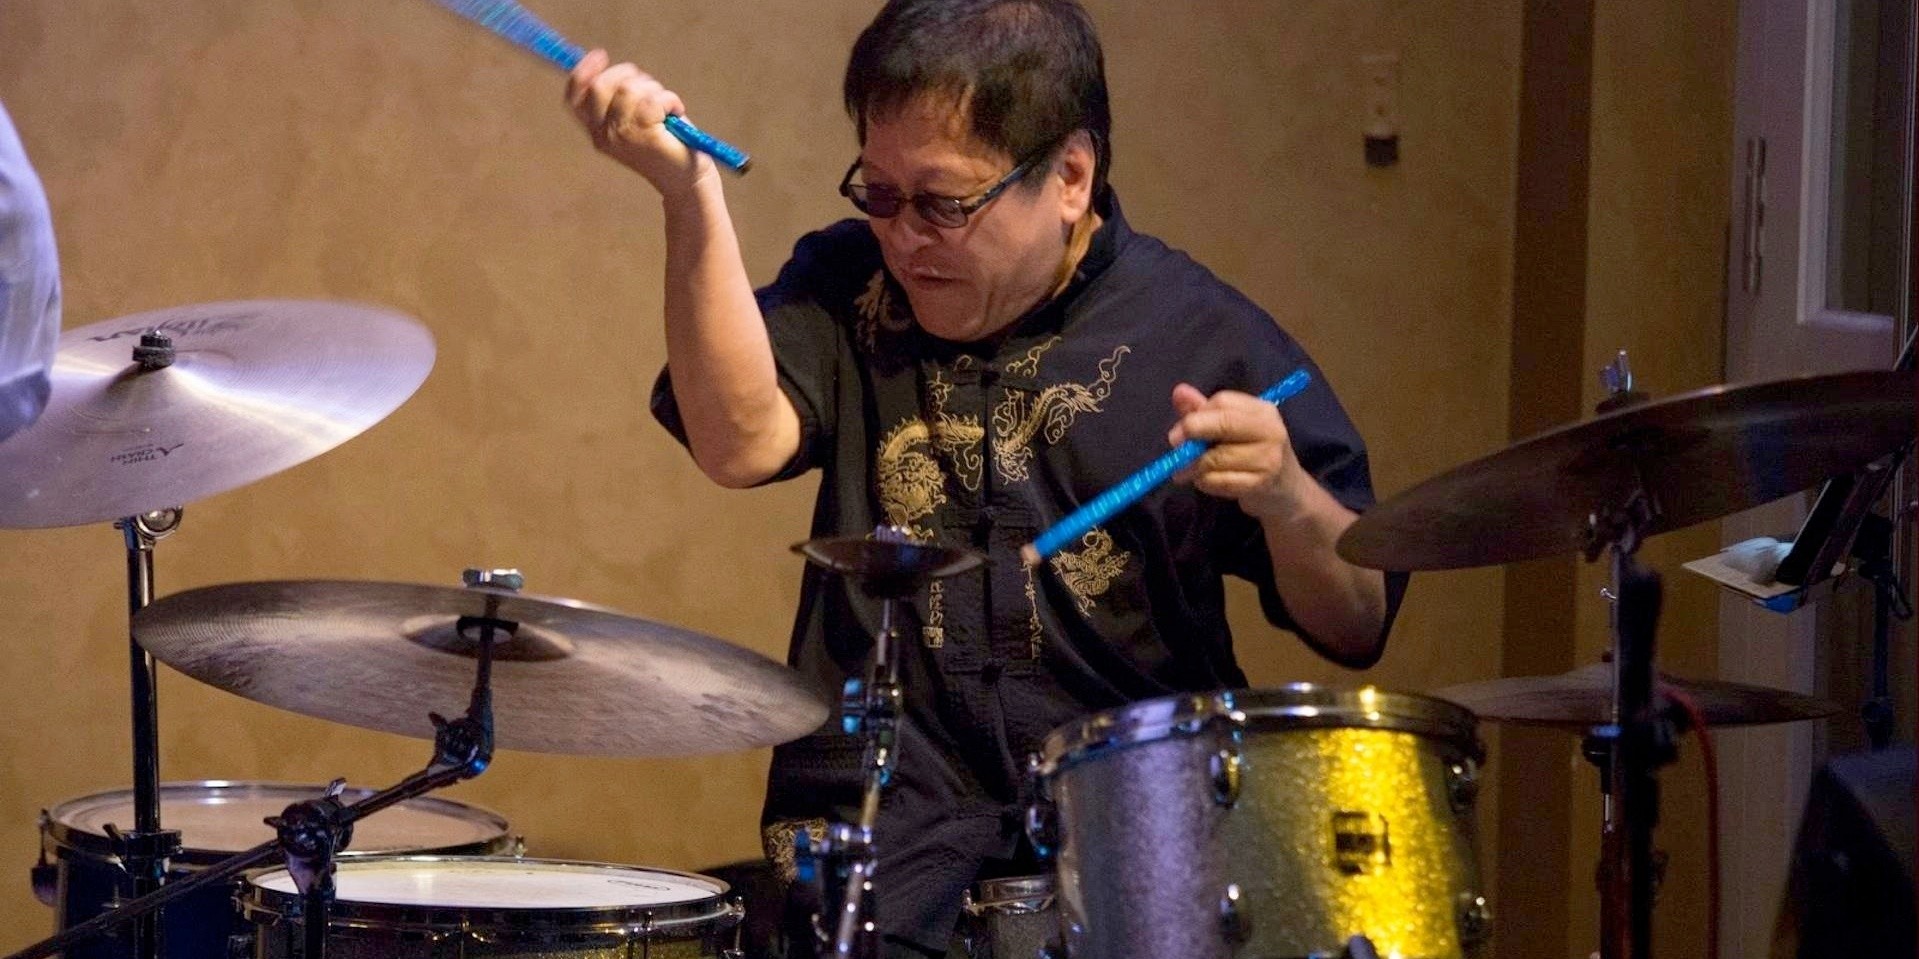 74-year-old drum legend Louis Soliano kickstarts series documenting Singapore's music giants